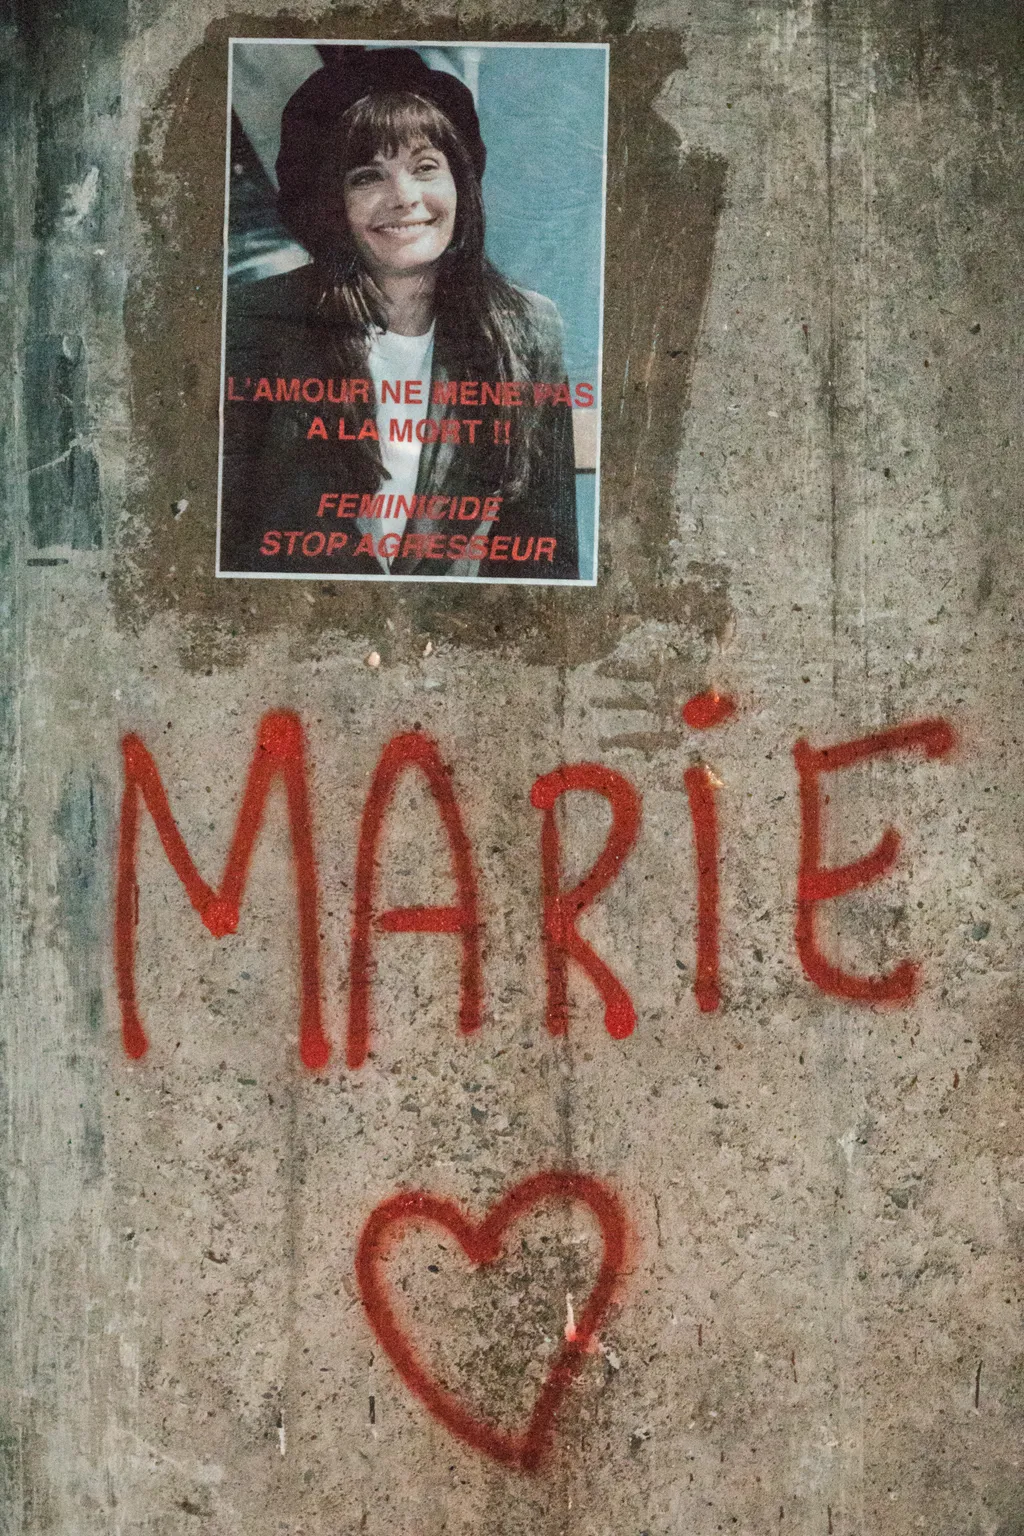 Feminists paste posters representing Marie Trintignant In Lyon Bertrand Cantat CONCERT DOMESTIC VIOLENCE Femicide FEMINISM Lyon Marie Trintignant MURDER MUSIC STREET ART Tag Women's right 